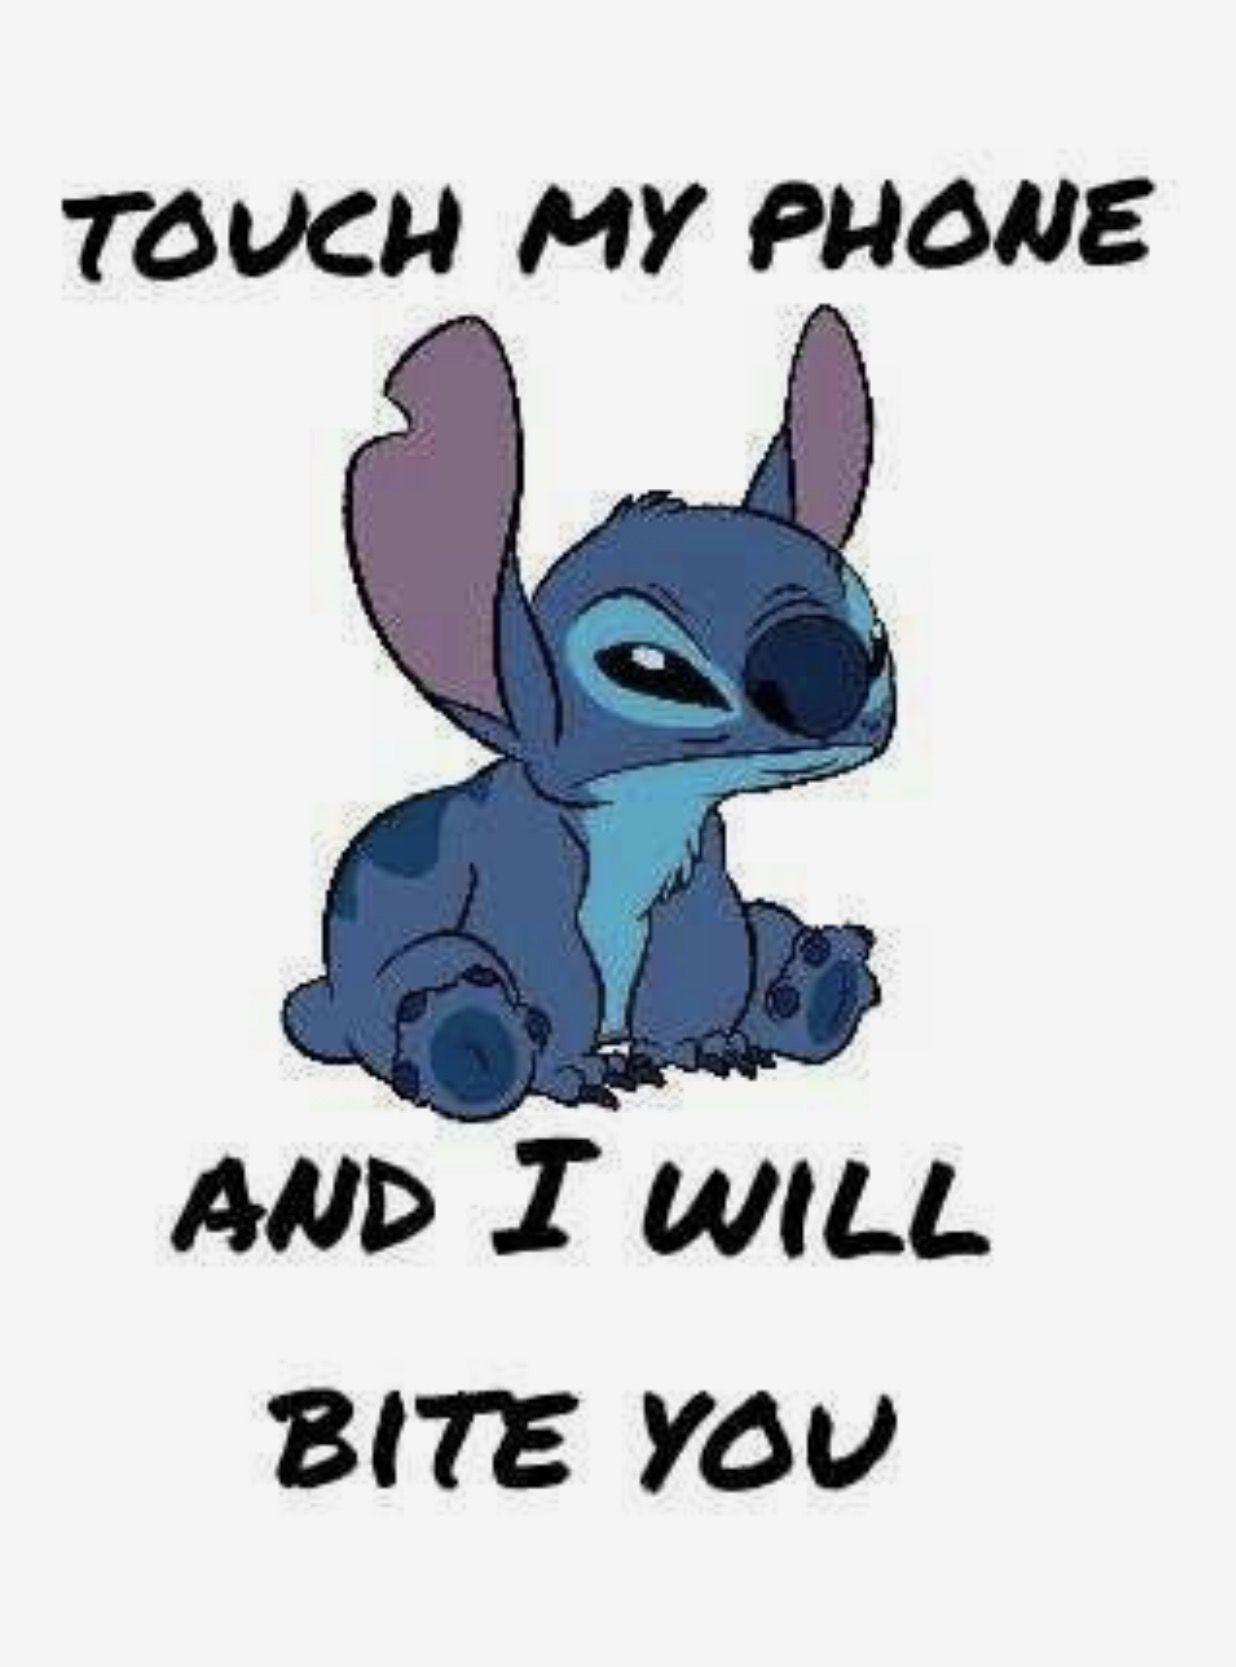 Funny Stitch Wallpaper Free Funny Stitch Background. Lilo and stitch quotes, Funny phone wallpaper, Joker wallpaper